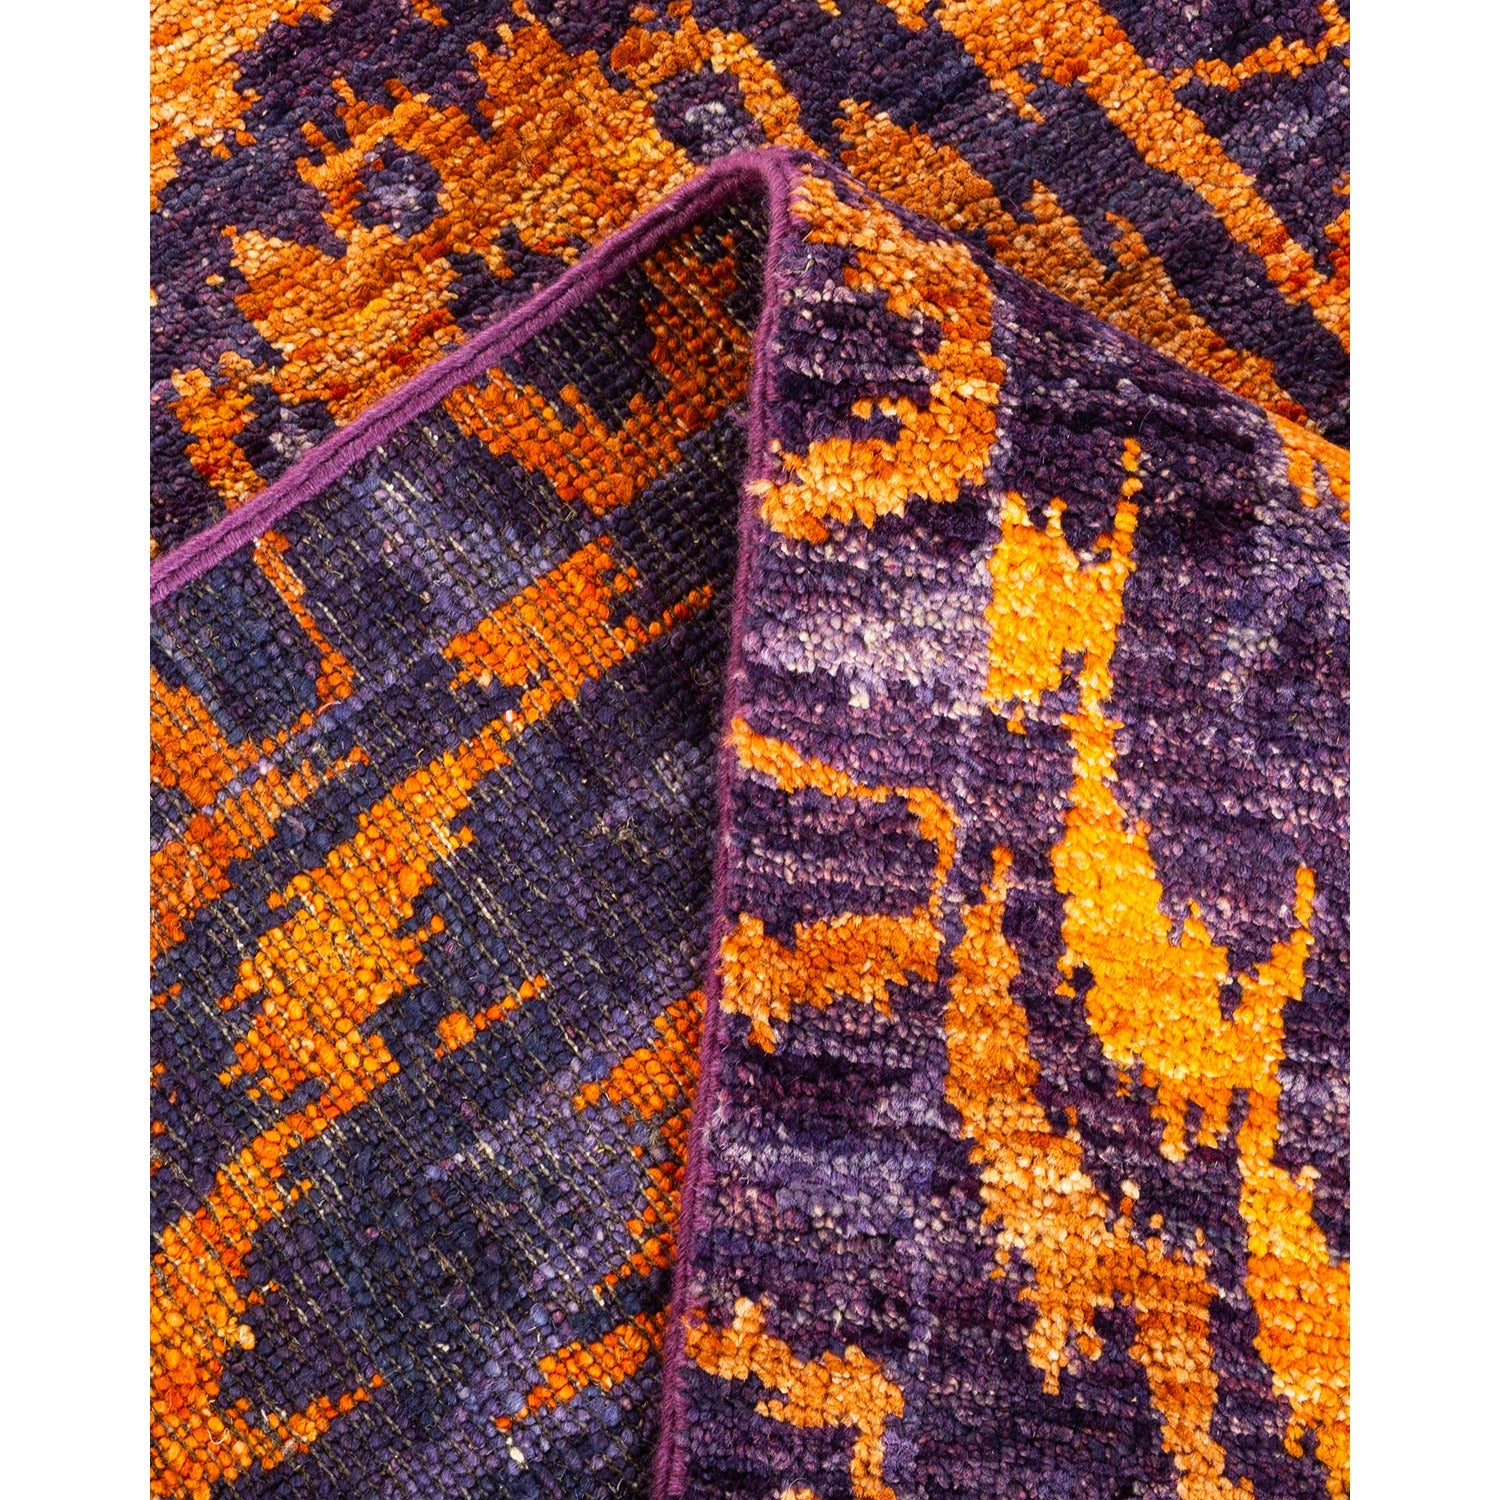 Vibrant purple and orange textured fabric with abstract shapes.